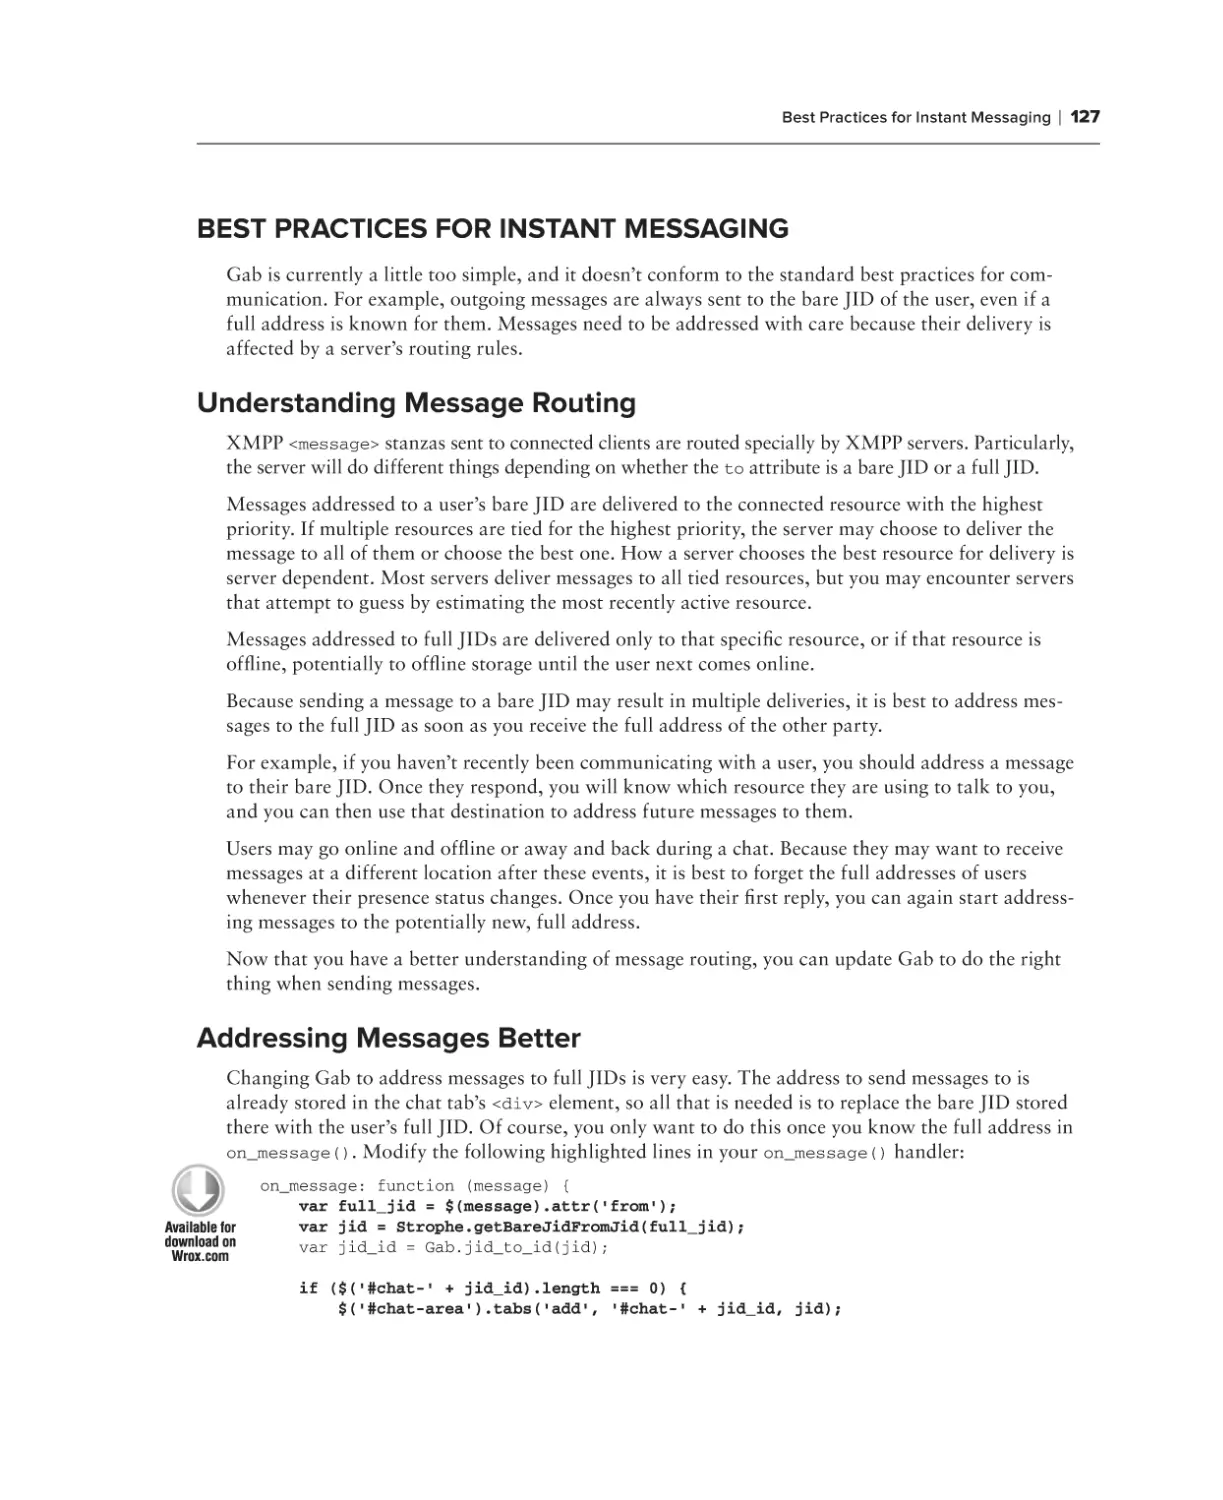 Best Practices for Instant Messaging